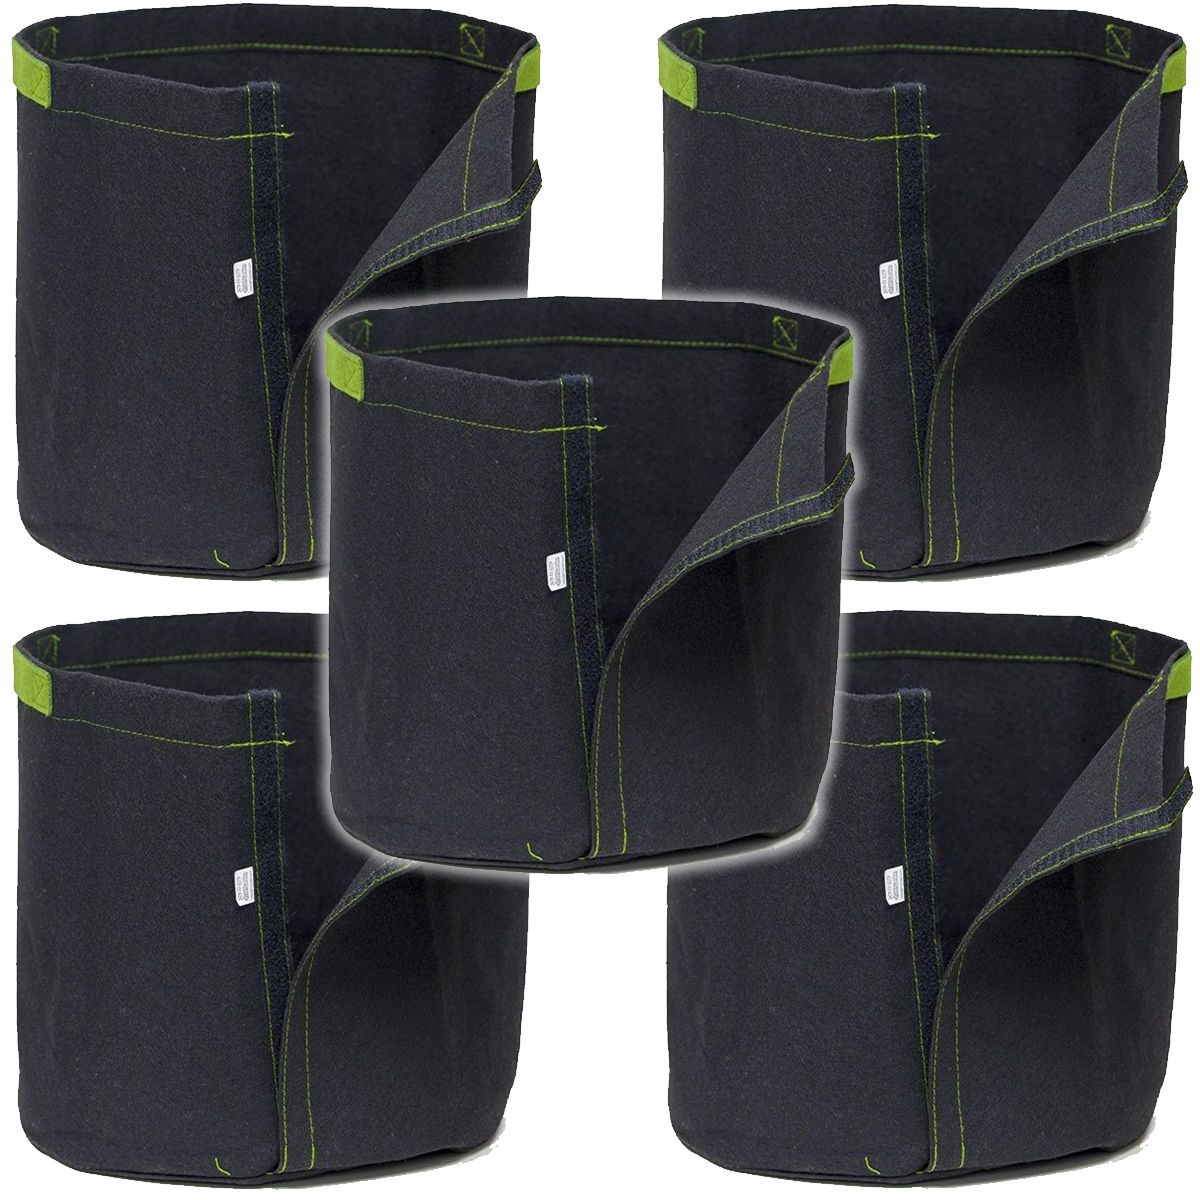 Details about   5-Pack Black/Green Grow Bags 3 Gallon Fabric Planter Root Growing Pots w/Handles 